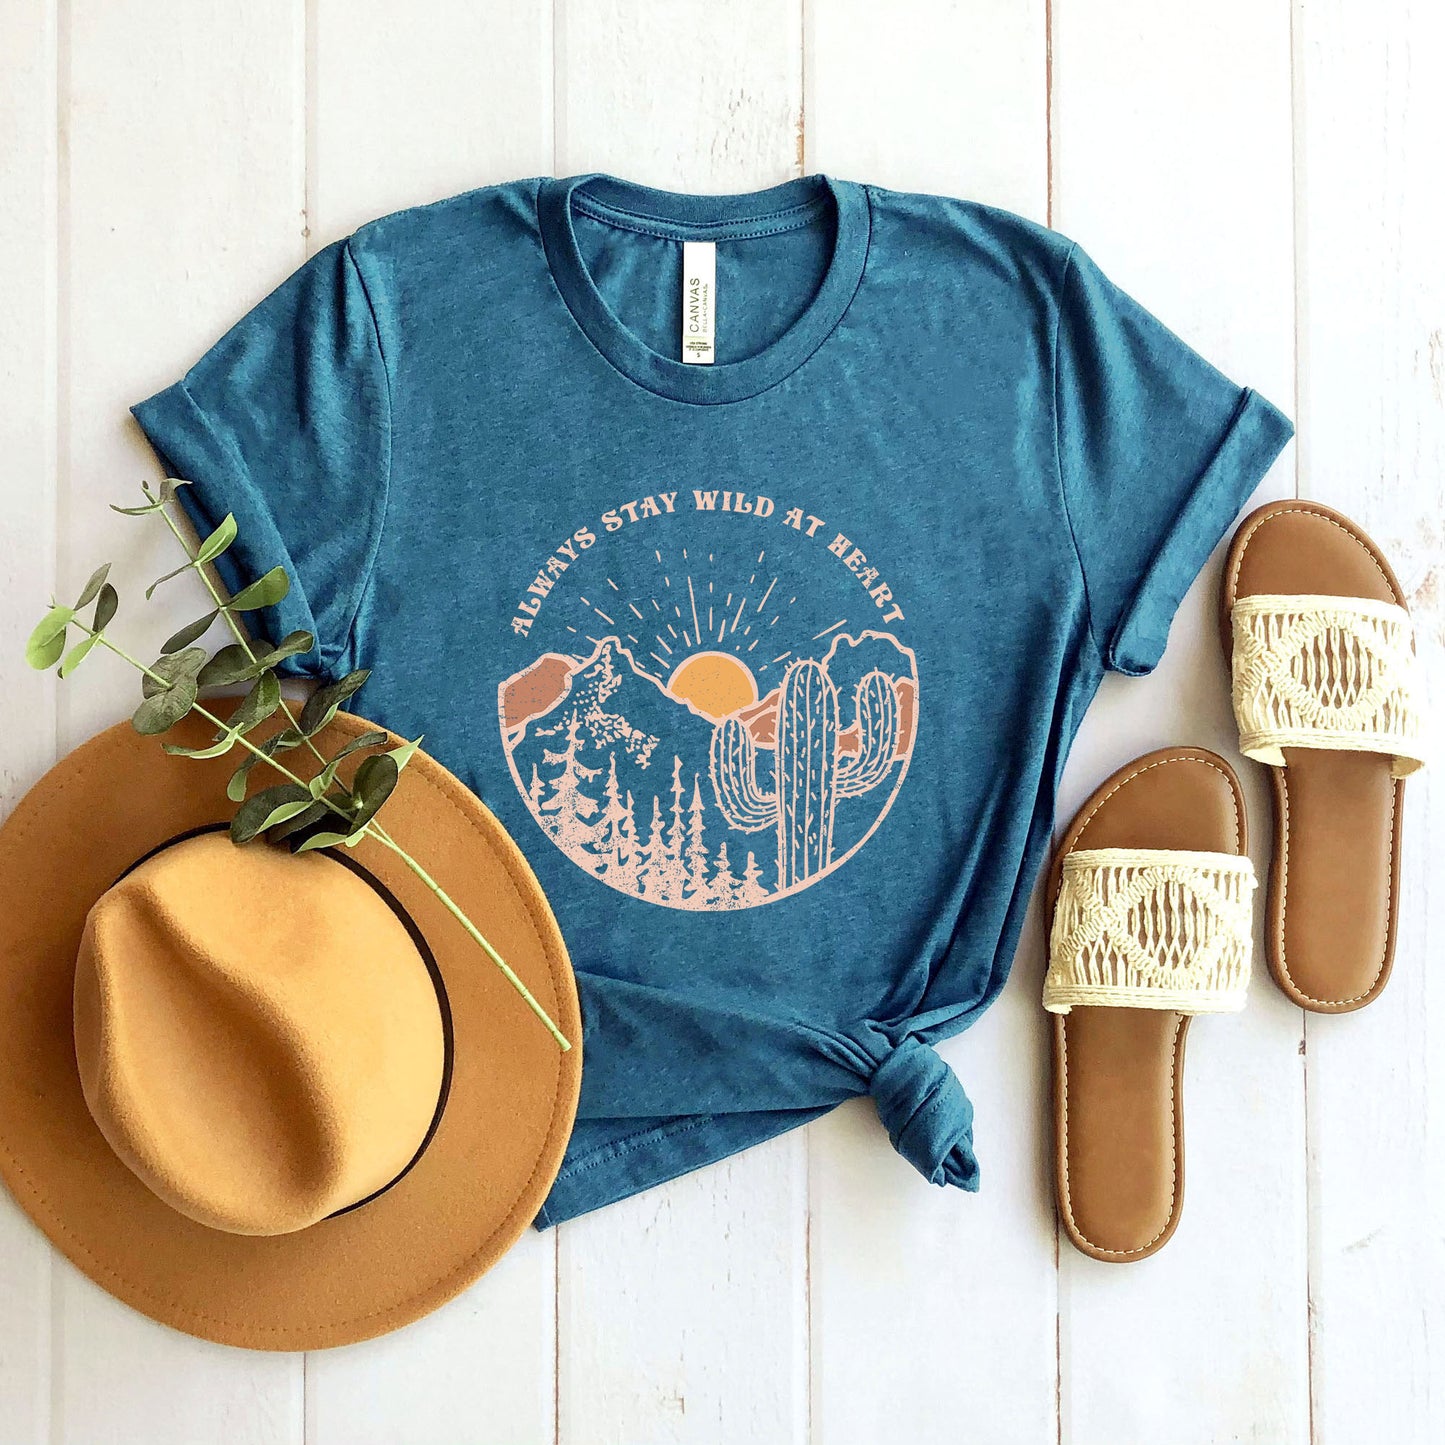 Always Stay Wild At Heart | Short Sleeve Graphic Tee